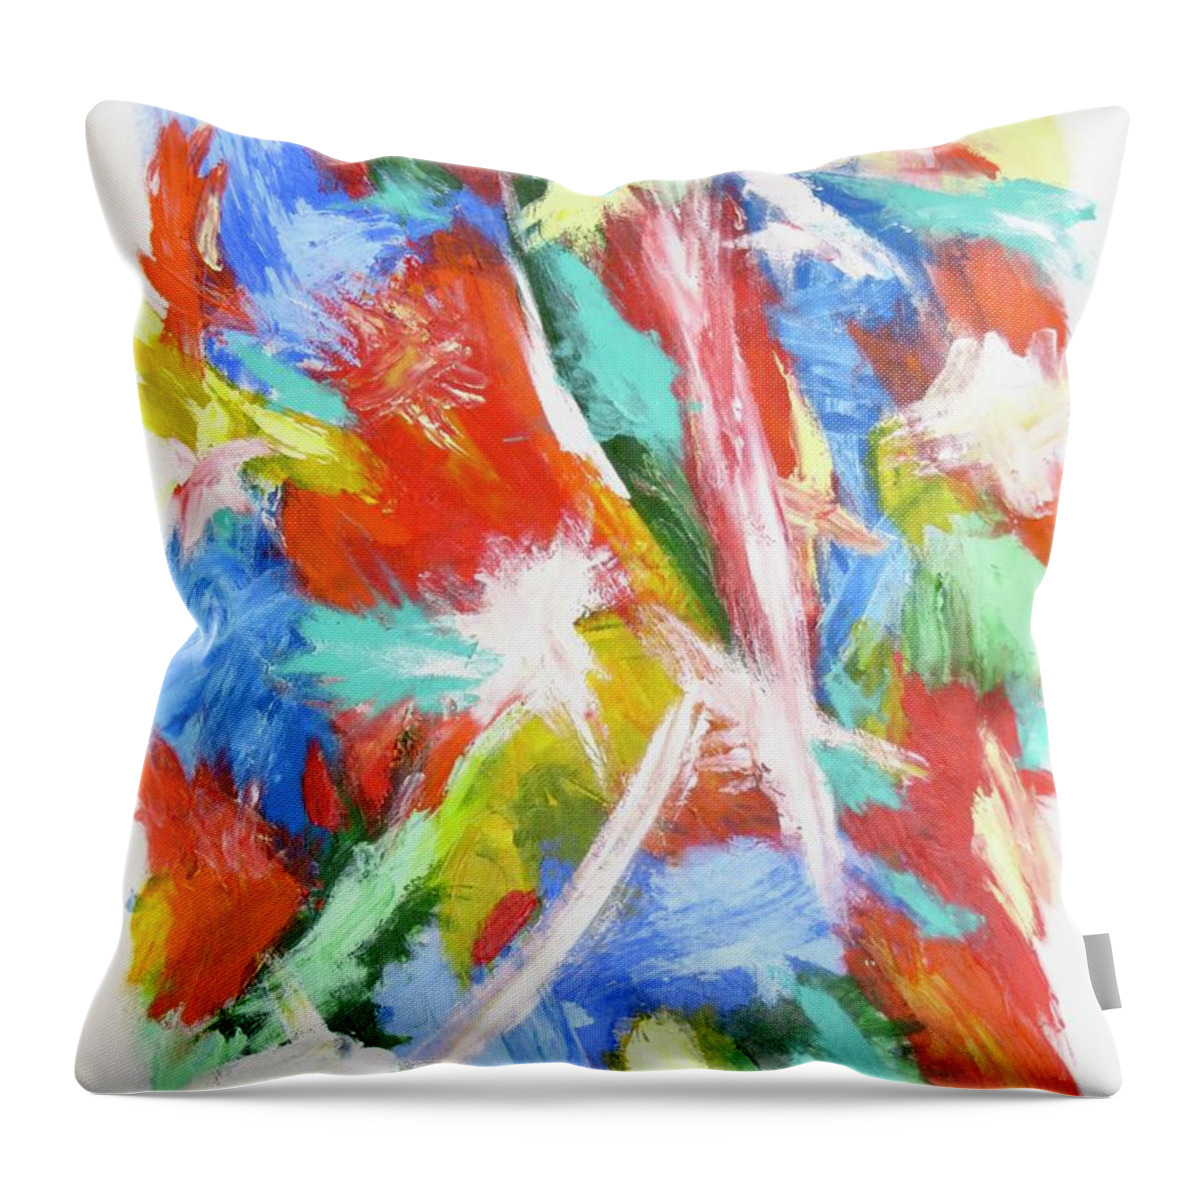 Abstract Throw Pillow featuring the painting Joie de Vivre No. 1 by J Loren Reedy